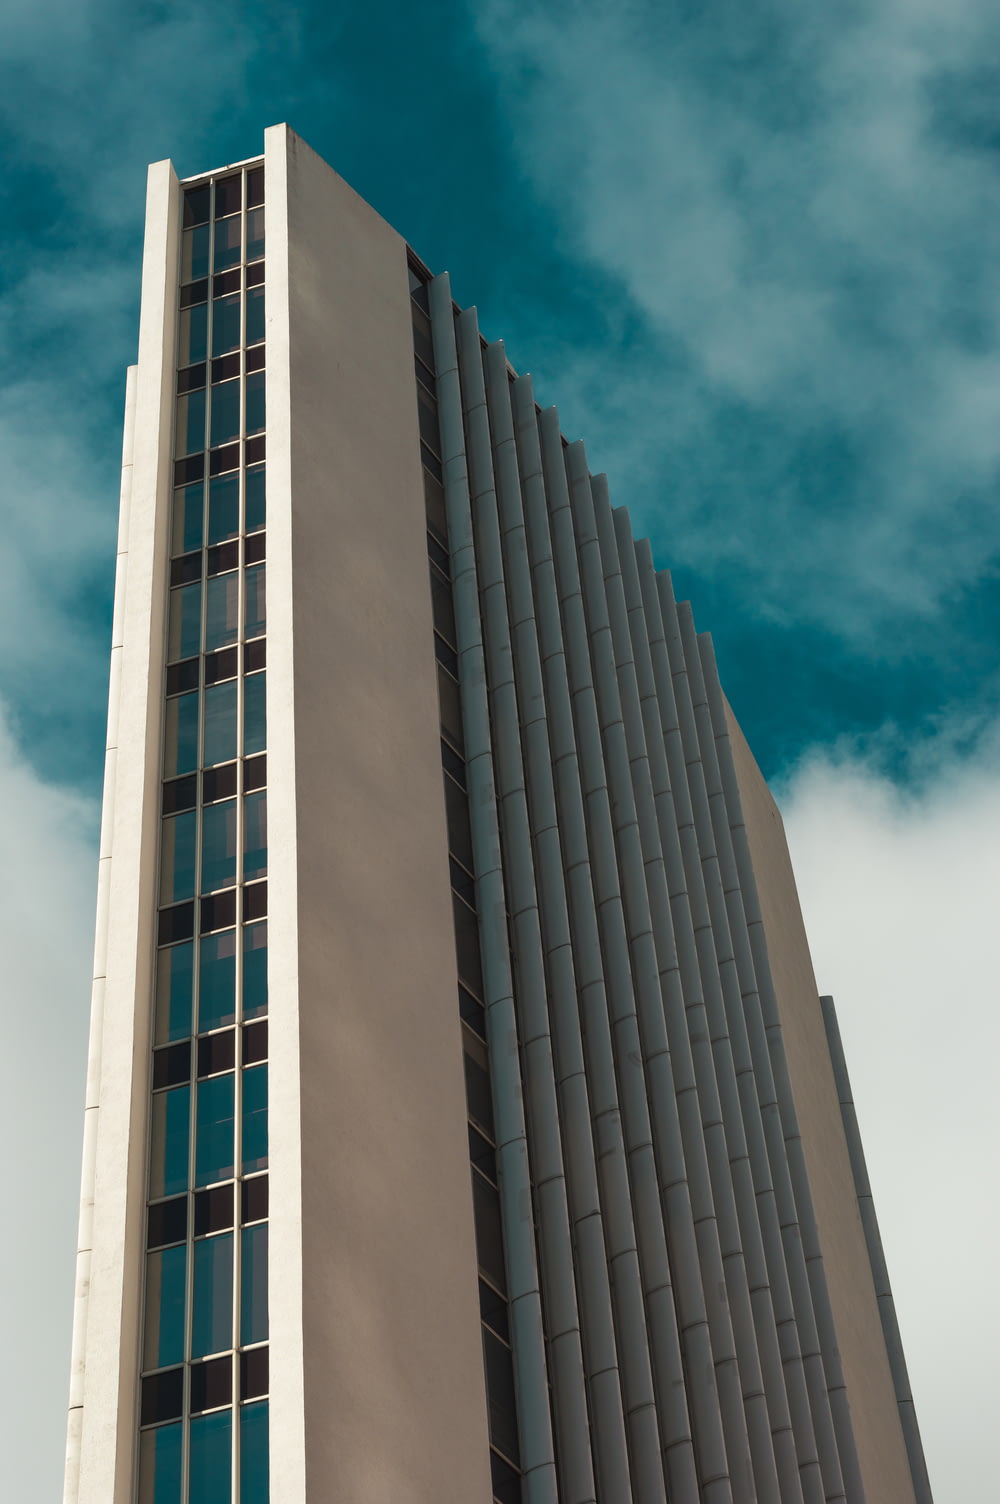 low angle photography of multi-story high rise building during daytime